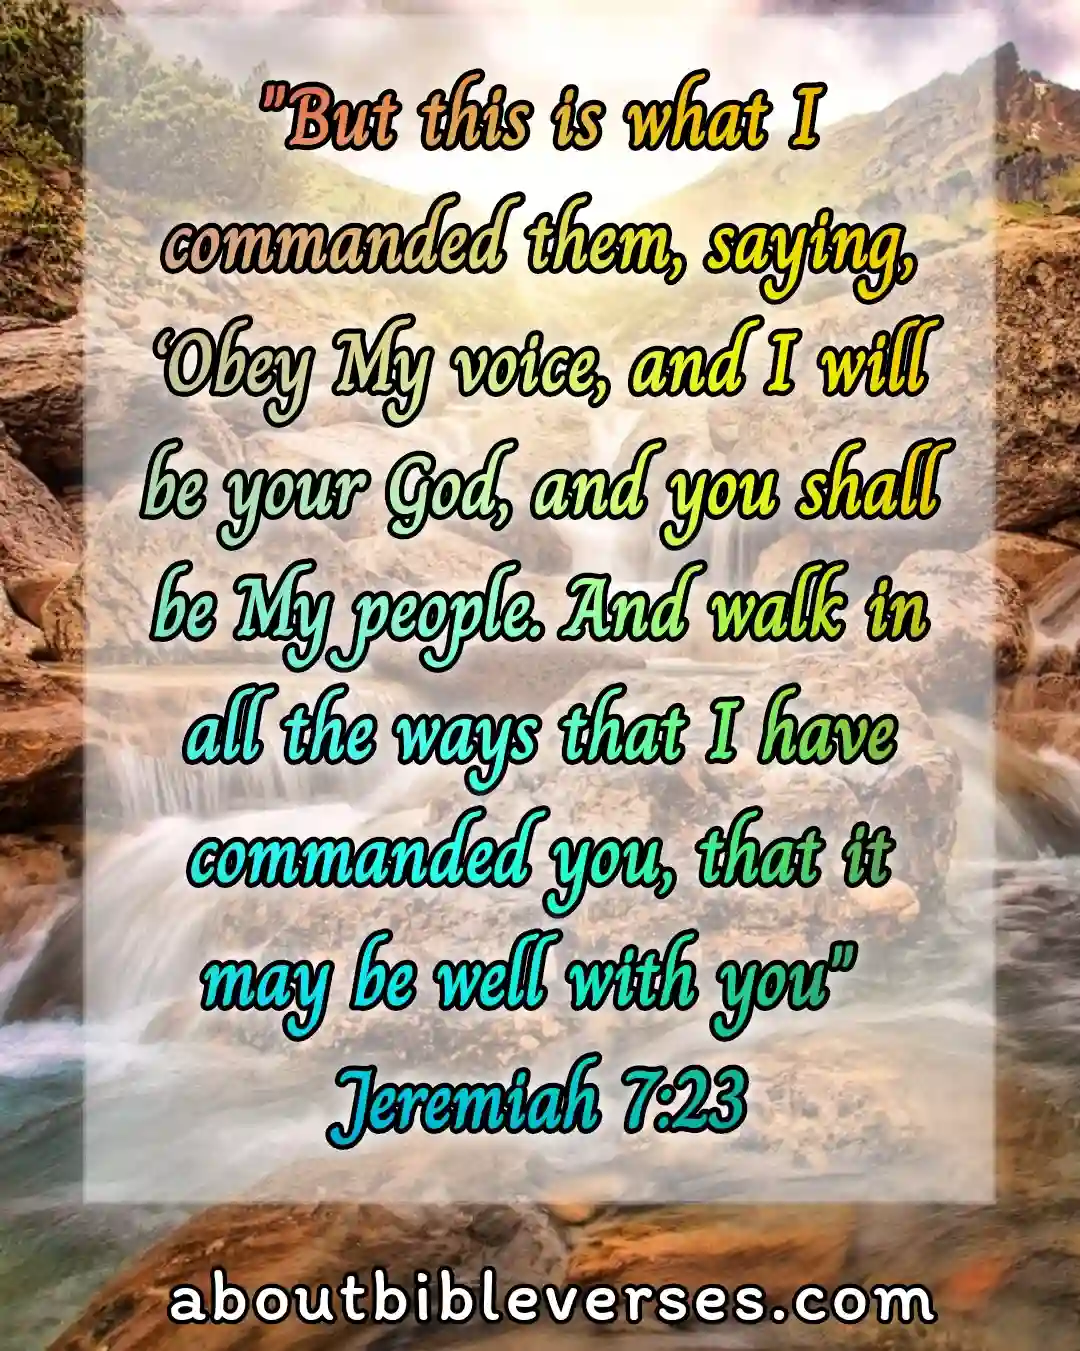 bible verses about Obedience (Jeremiah 7:23)